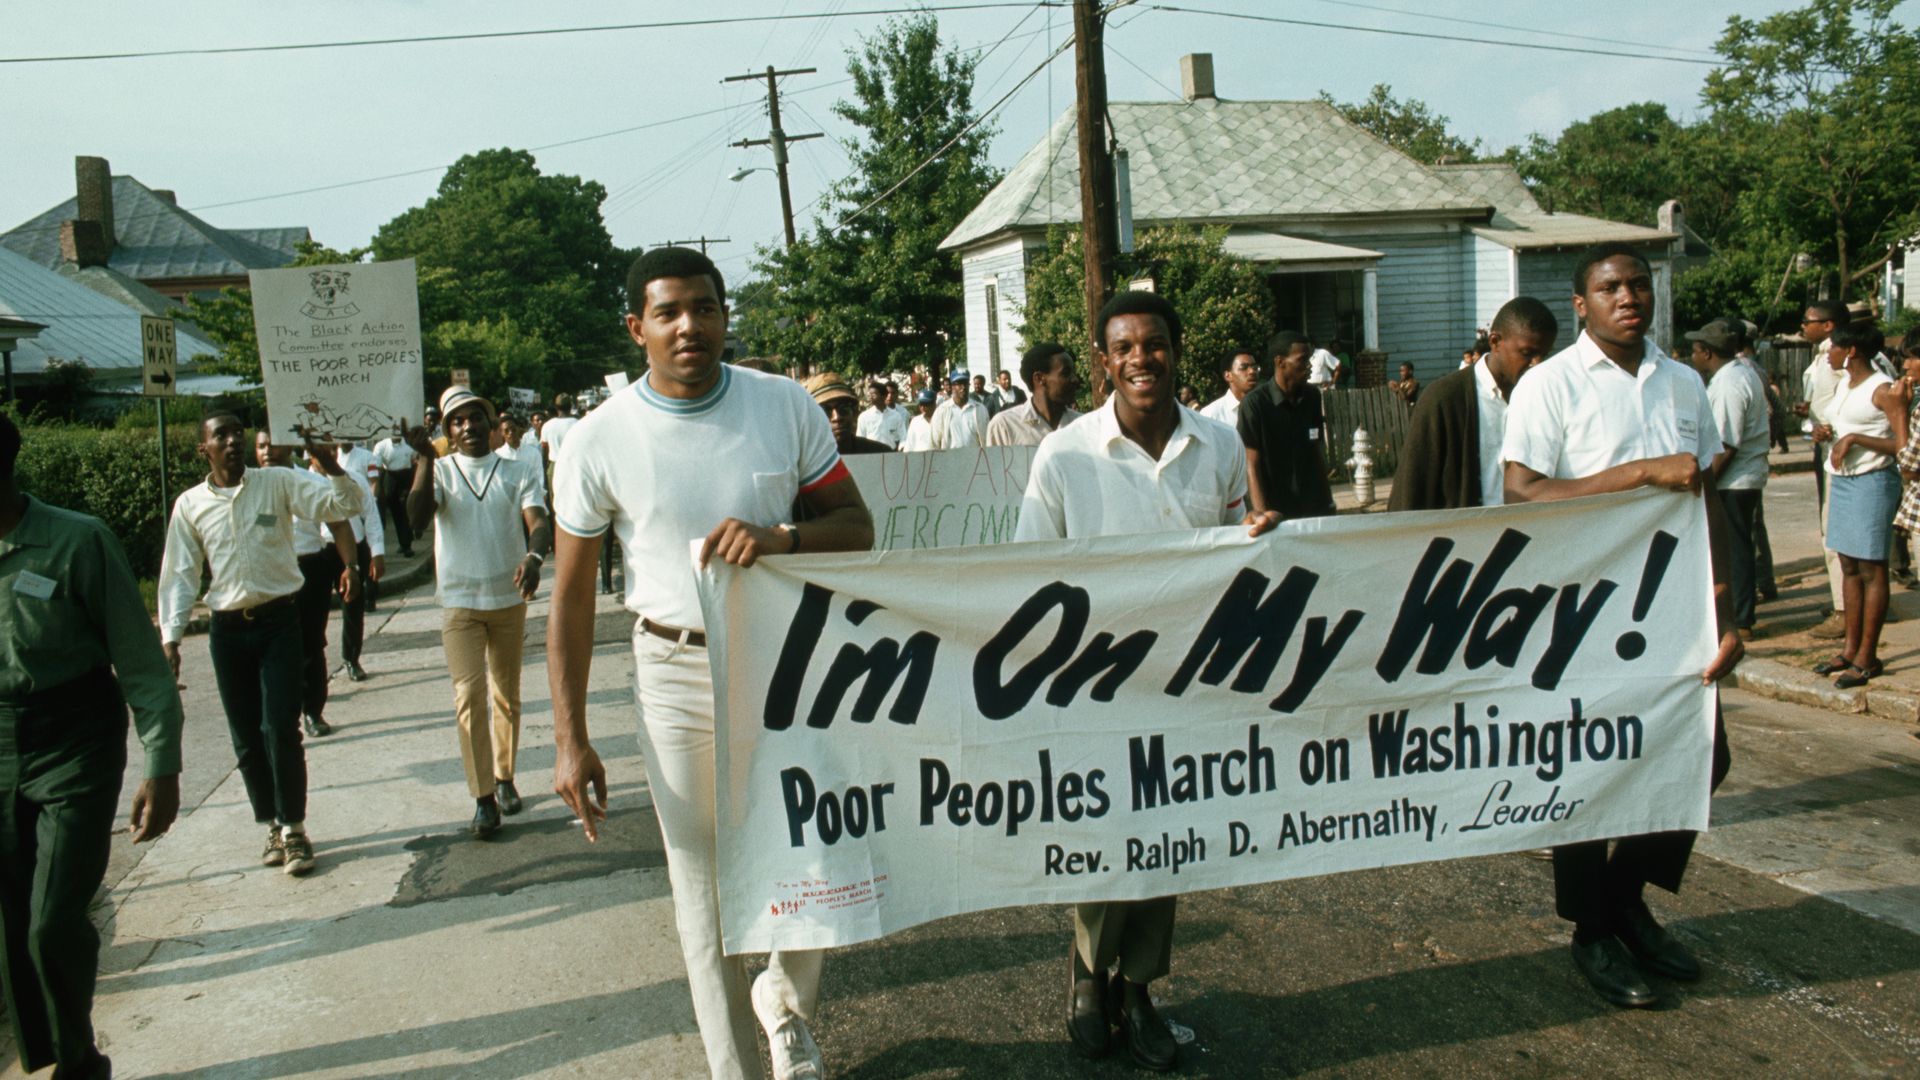 Protestors march for the Poor People's Campaign in Alabama, 1968